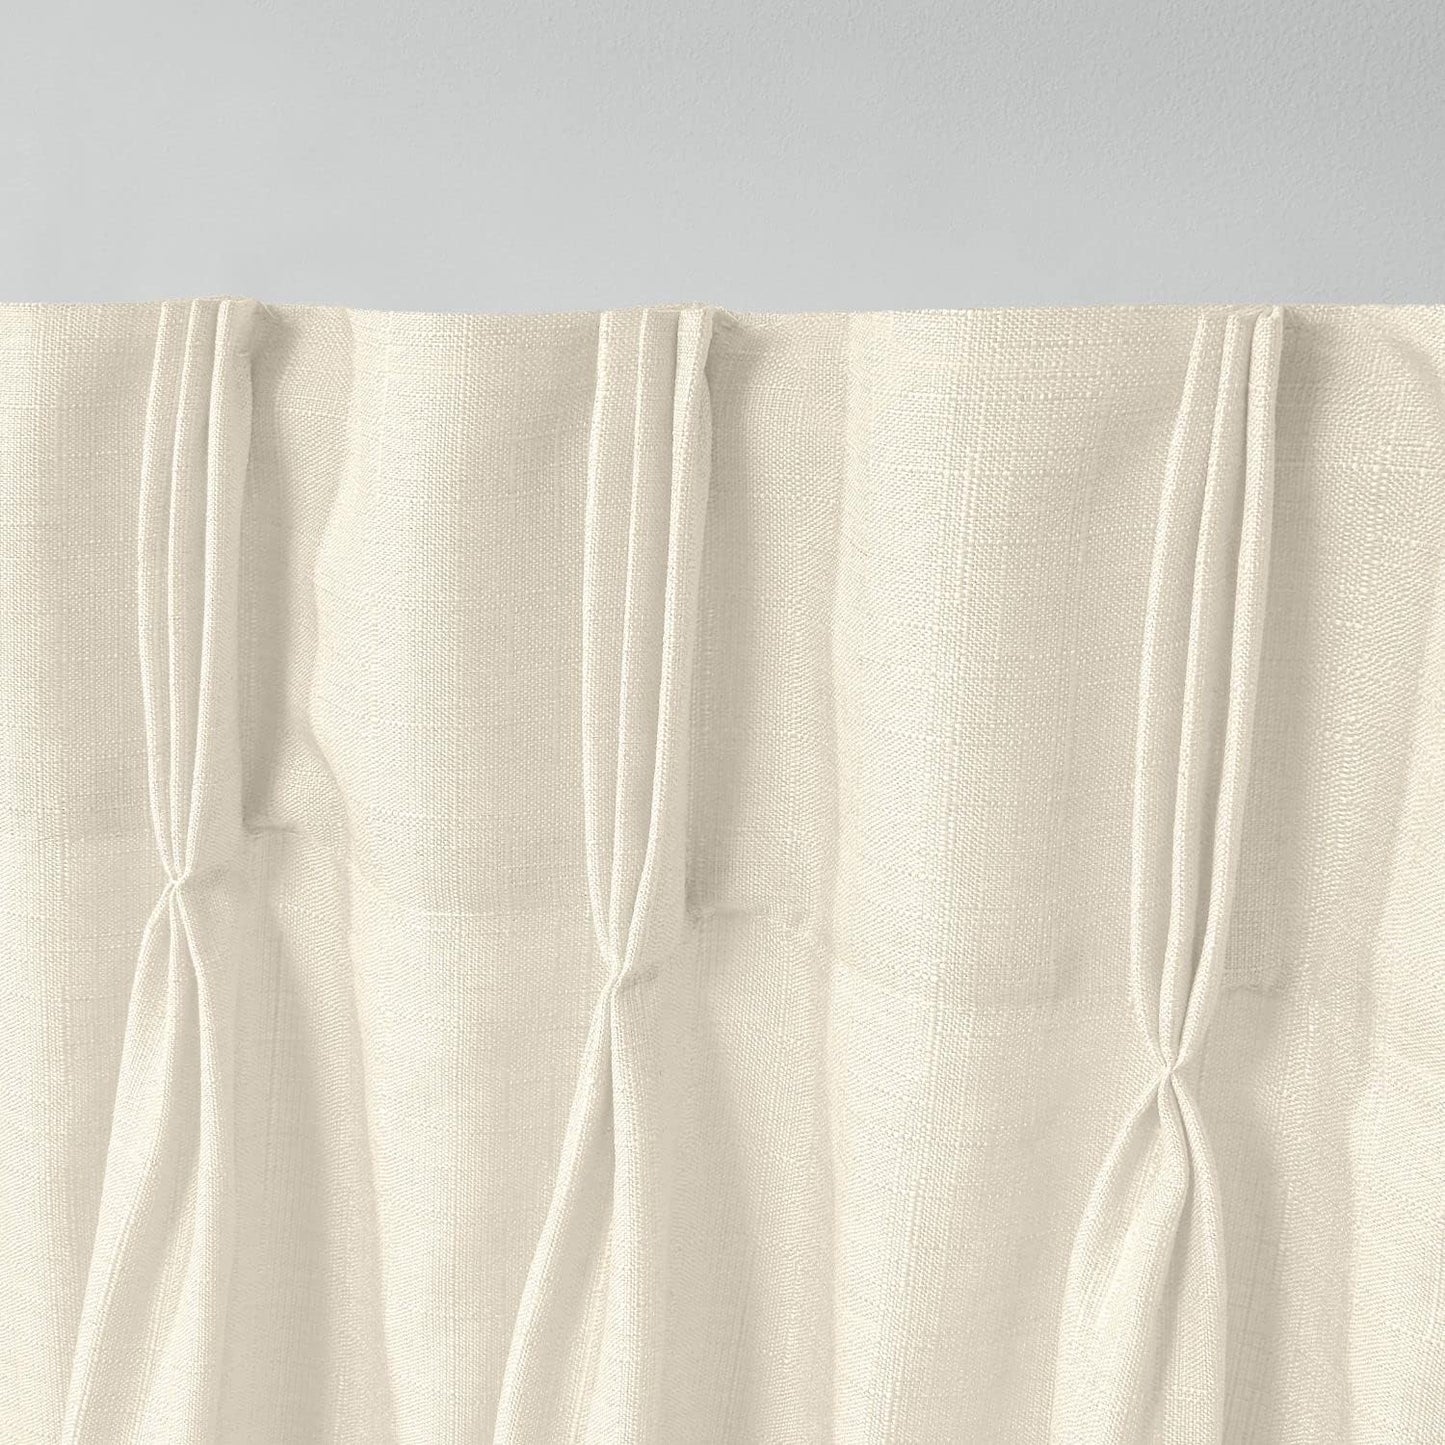 Exclusive Home Loha Light Filtering Pinch Pleat Curtain Panel Pair, 84" Length, Ivory  Amalgamted Textiles   